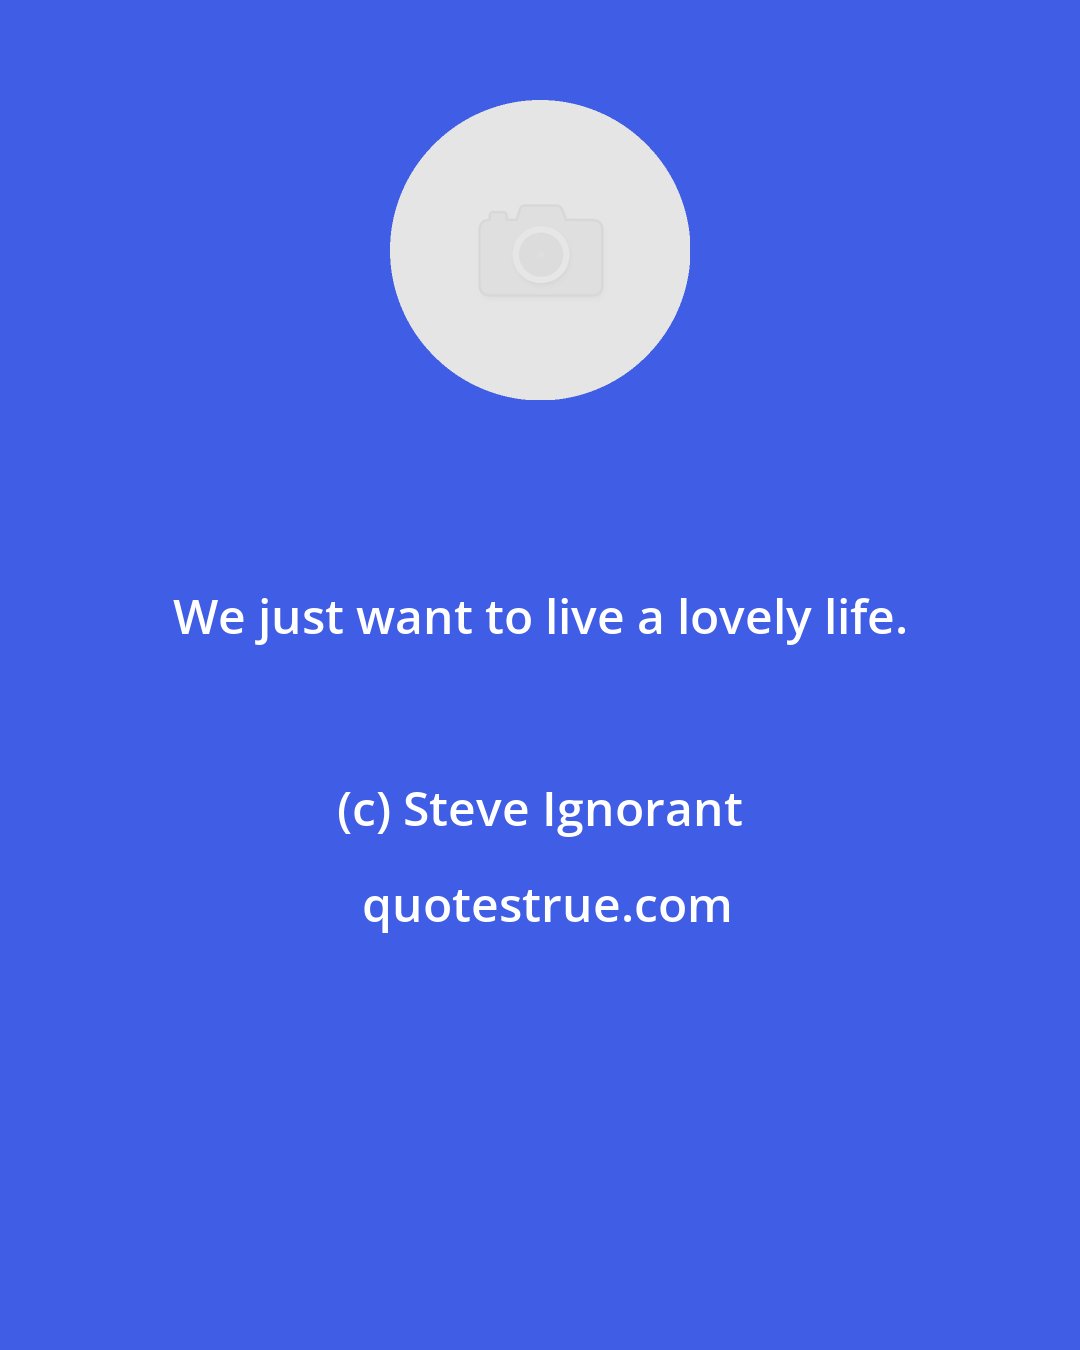 Steve Ignorant: We just want to live a lovely life.